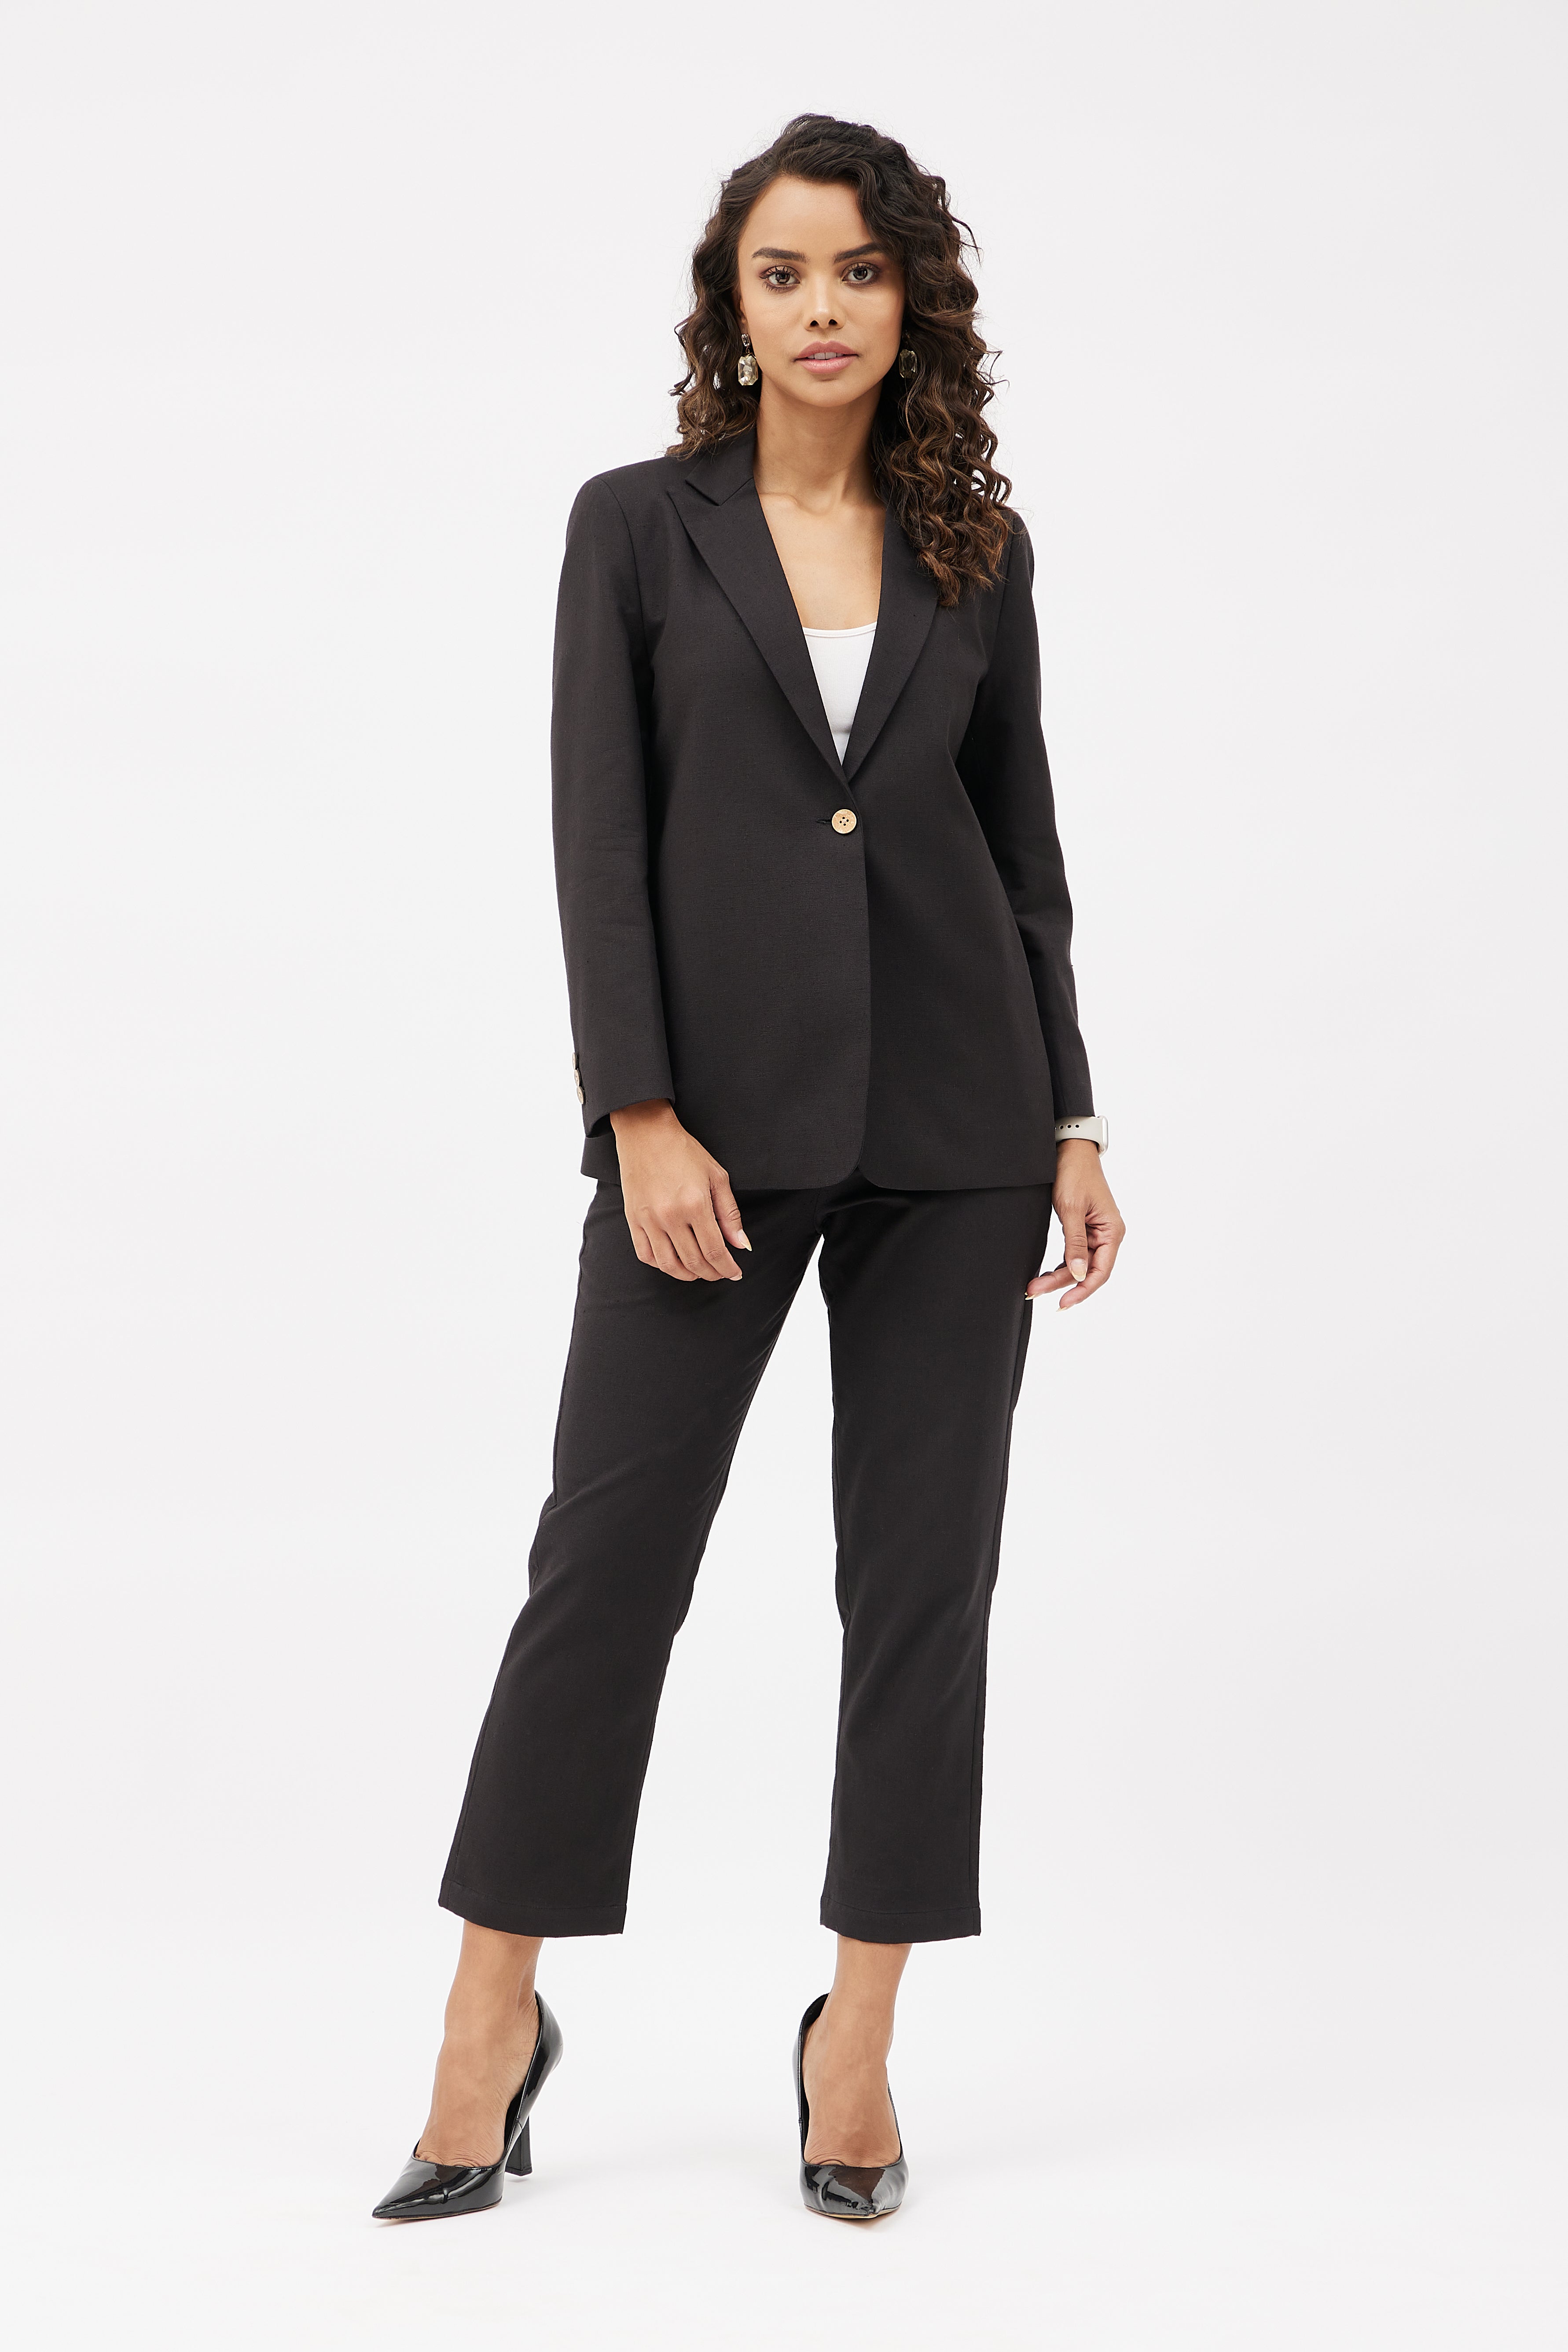 Parx Suits  Buy PARX Black Solid Blazer With Trouser Set of 2 Online   Nykaa Fashion